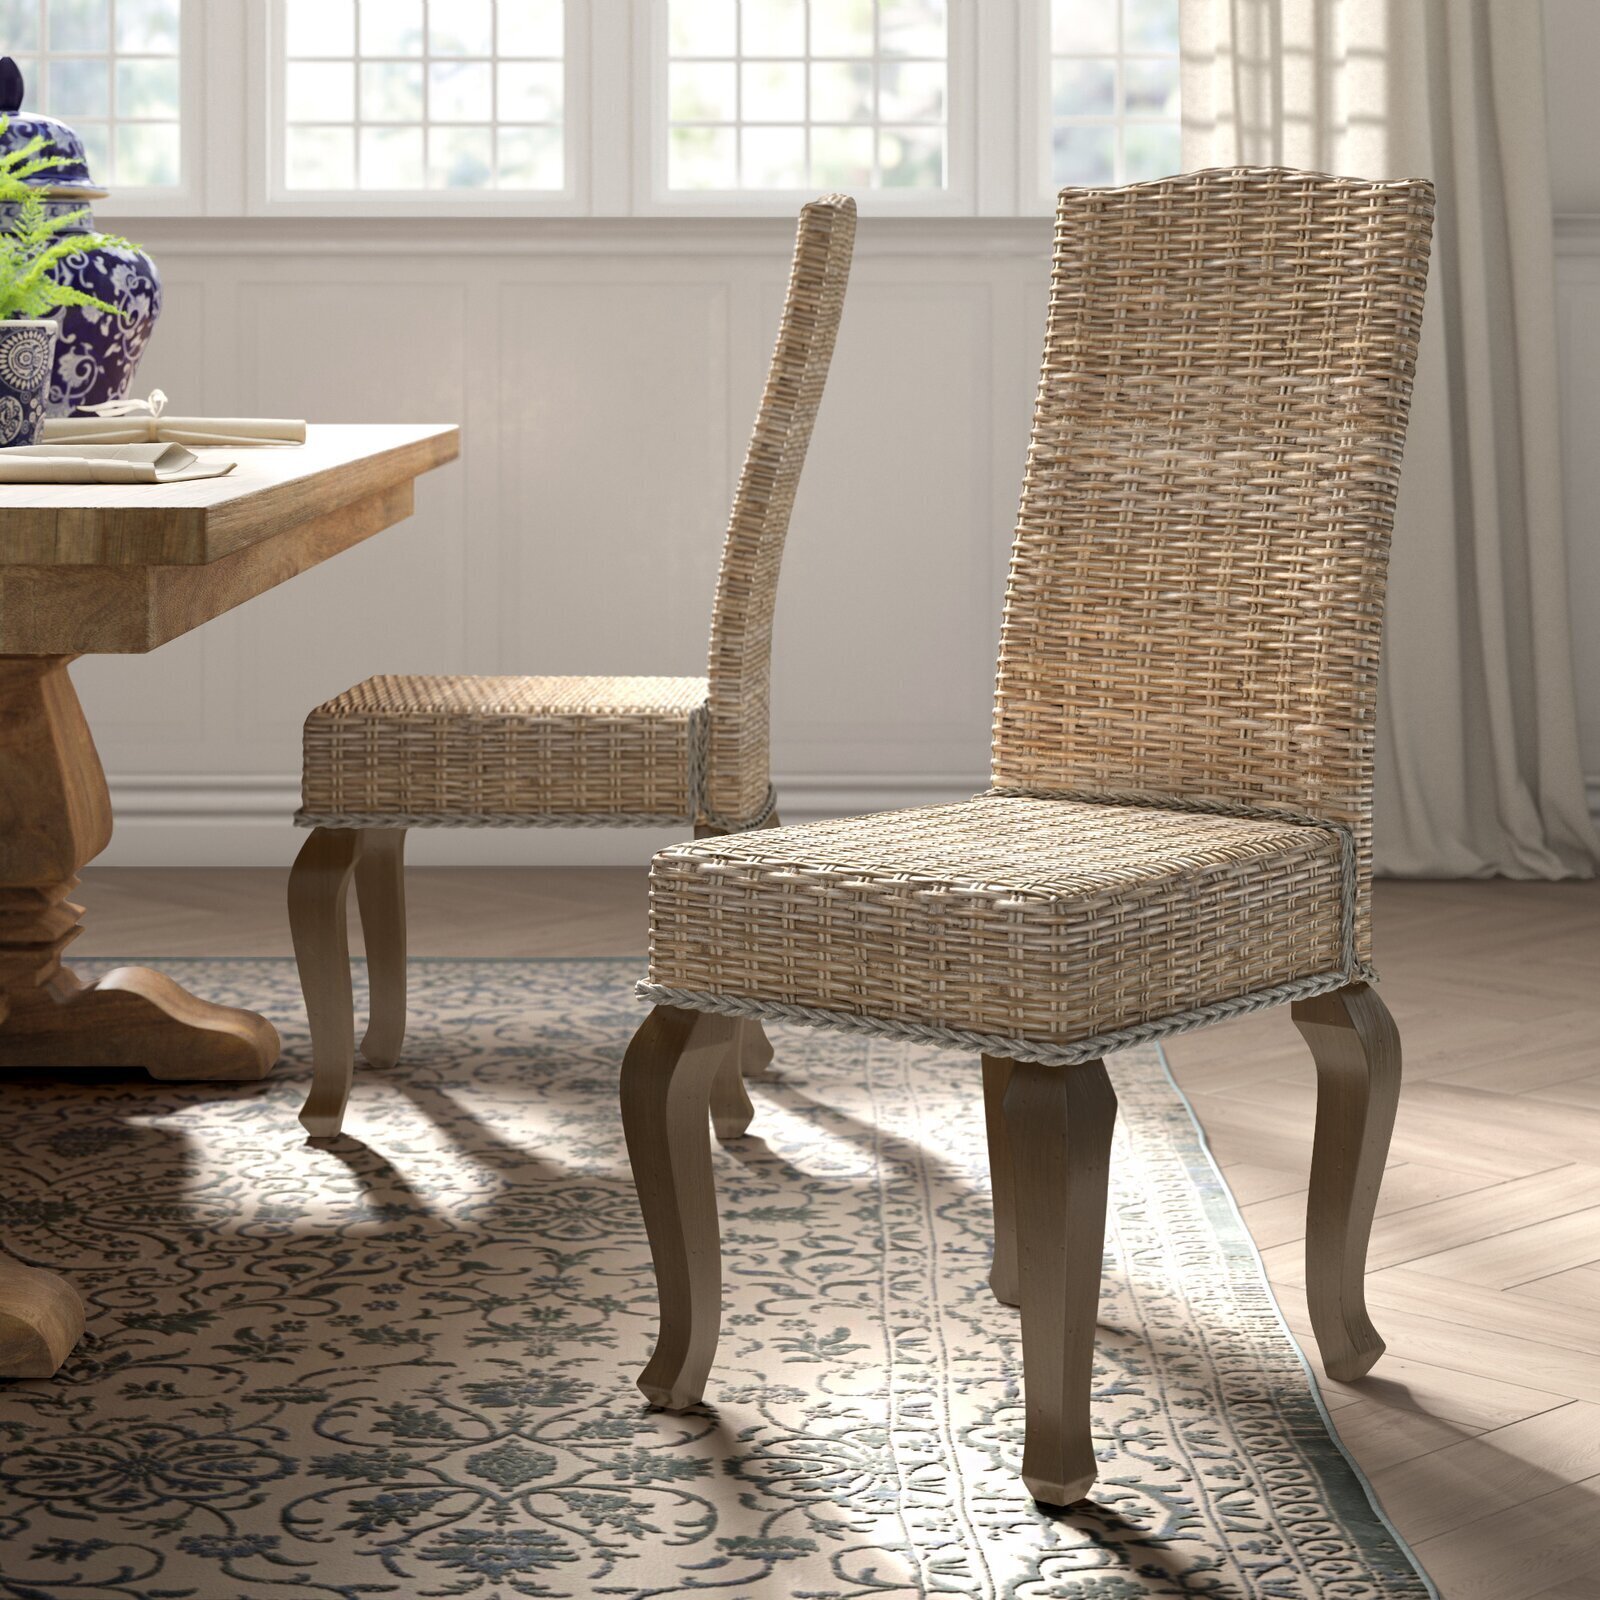 French Inspired Wicker Indoor Dining Chairs 